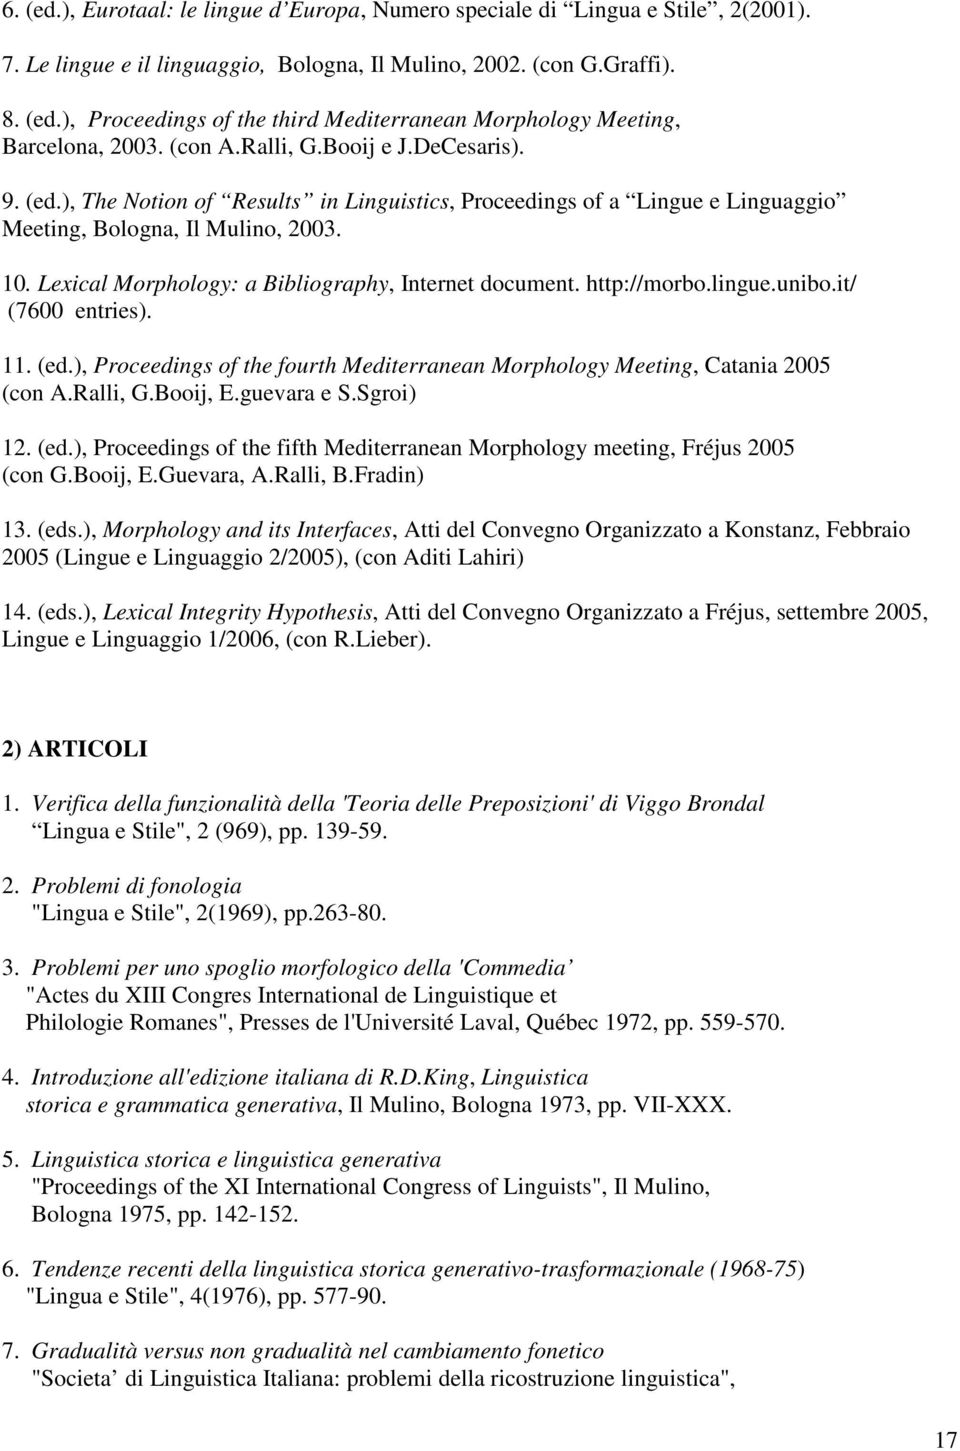 Lexical Morphology: a Bibliography, Internet document. http://morbo.lingue.unibo.it/ (7600 entries). 11. (ed.), Proceedings of the fourth Mediterranean Morphology Meeting, Catania 2005 (con A.